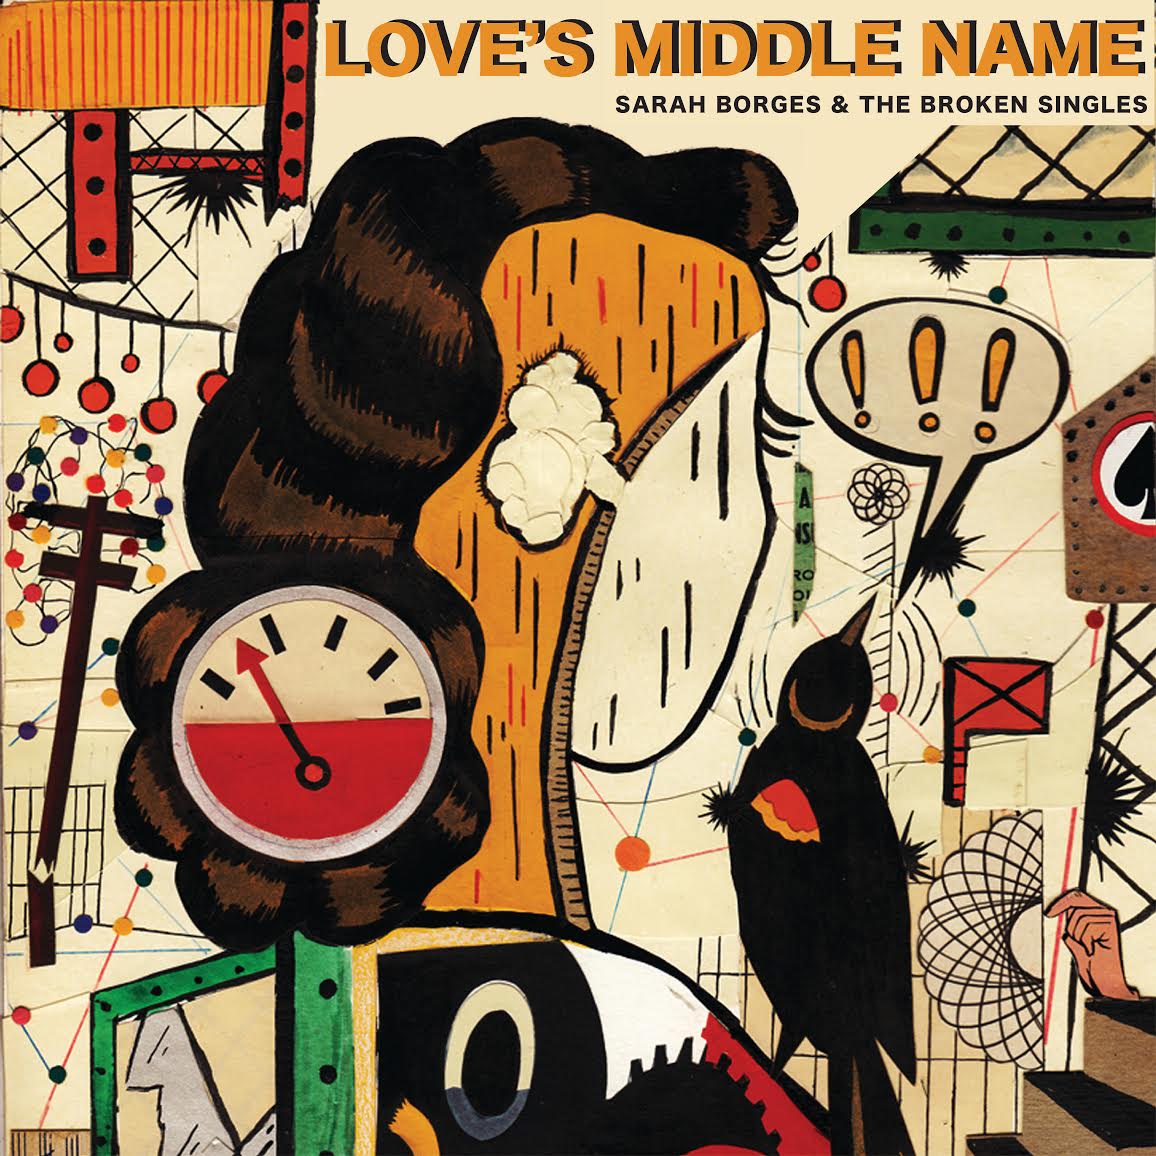 Sarah Borges & the Broken Singles: Love’s Middle Name